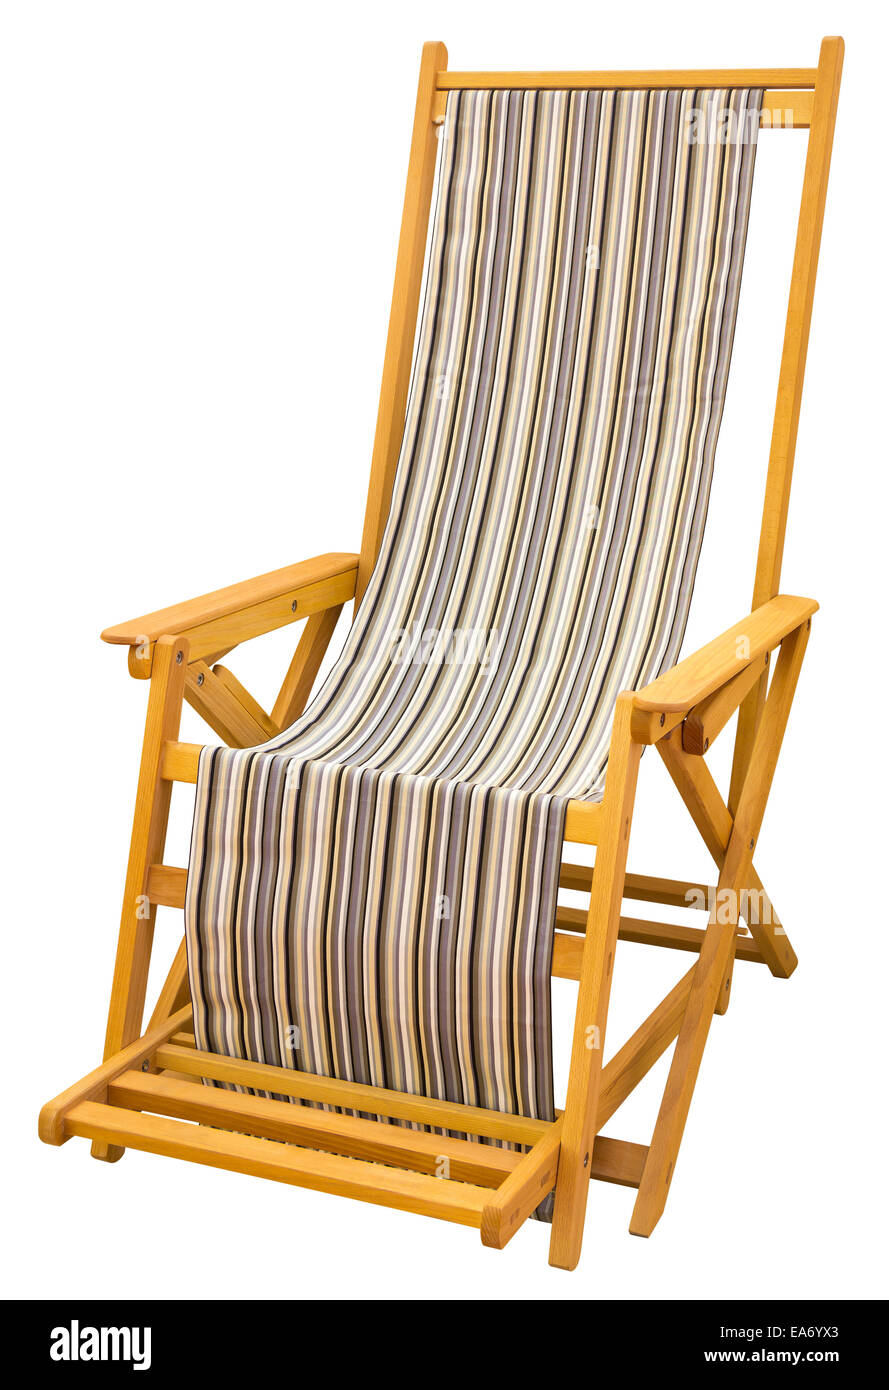 Wooden Beach chairs with various colors fabric Isolated with Clipping Path Stock Photo